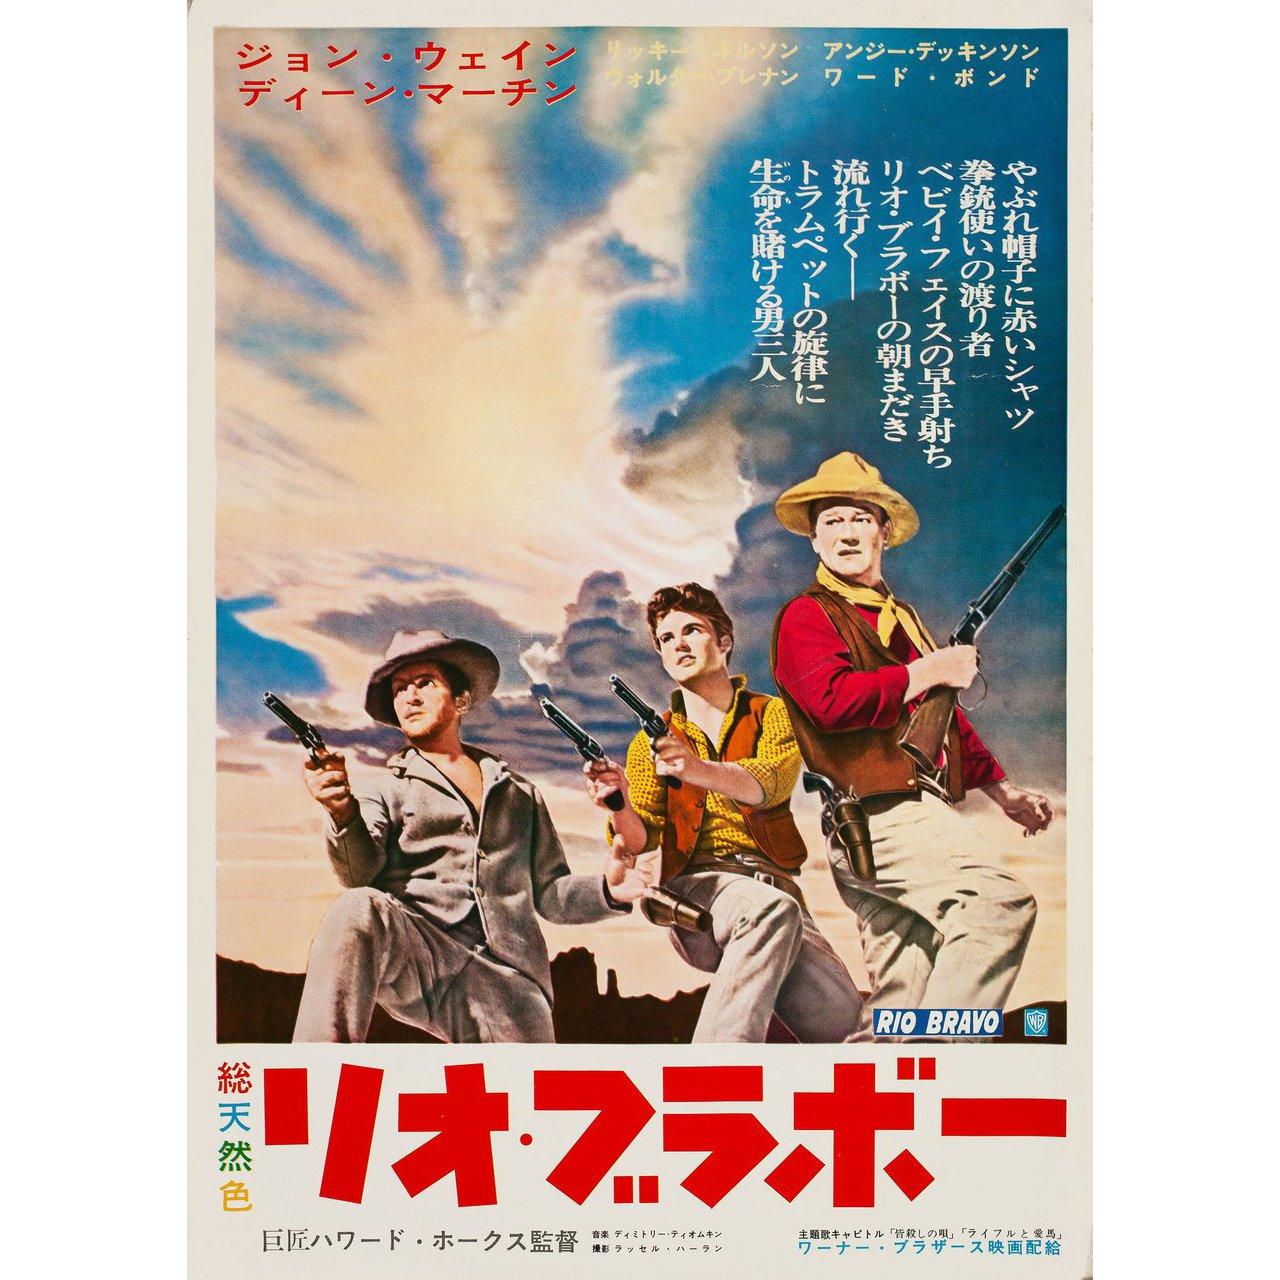 Original 1959 Japanese B3 poster for the film Rio Bravo directed by Howard Hawks with John Wayne / Dean Martin / Ricky Nelson / Angie Dickinson. Very Good-Fine condition, rolled. Please note: the size is stated in inches and the actual size can vary